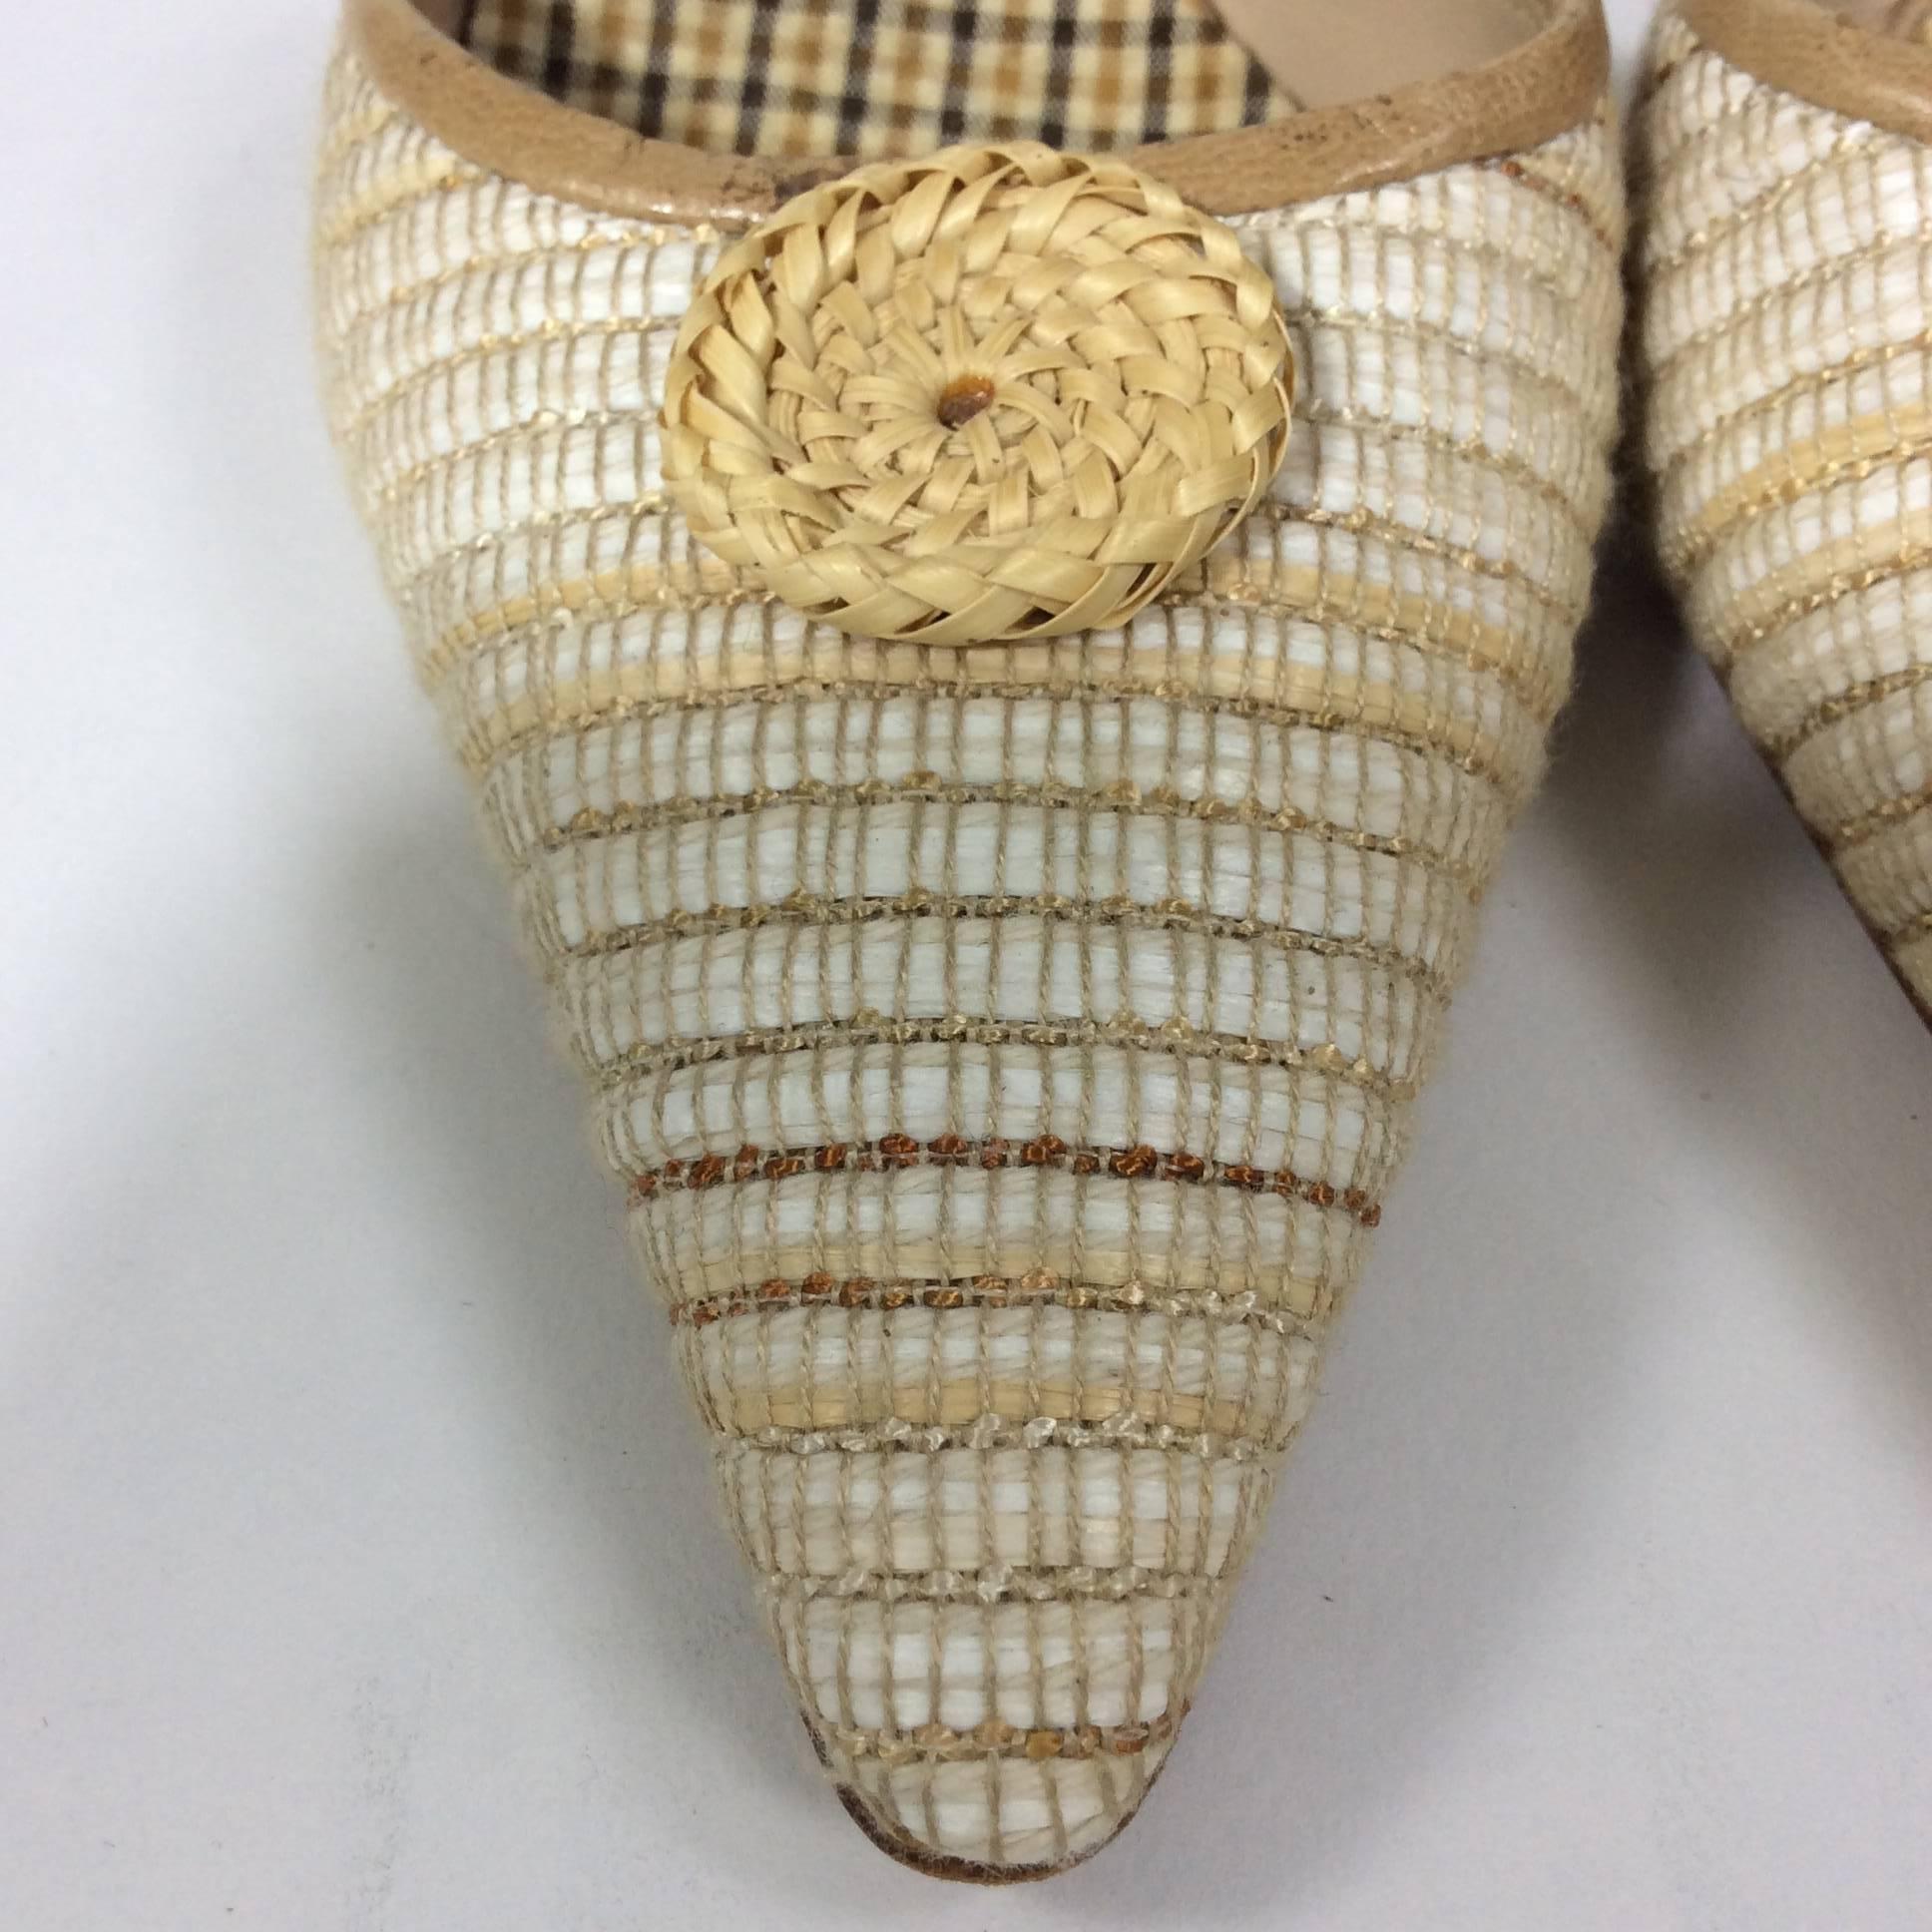 Manolo Blahnik Tan and Cream Pointed Slides with Wicker Detail In Excellent Condition For Sale In Narberth, PA